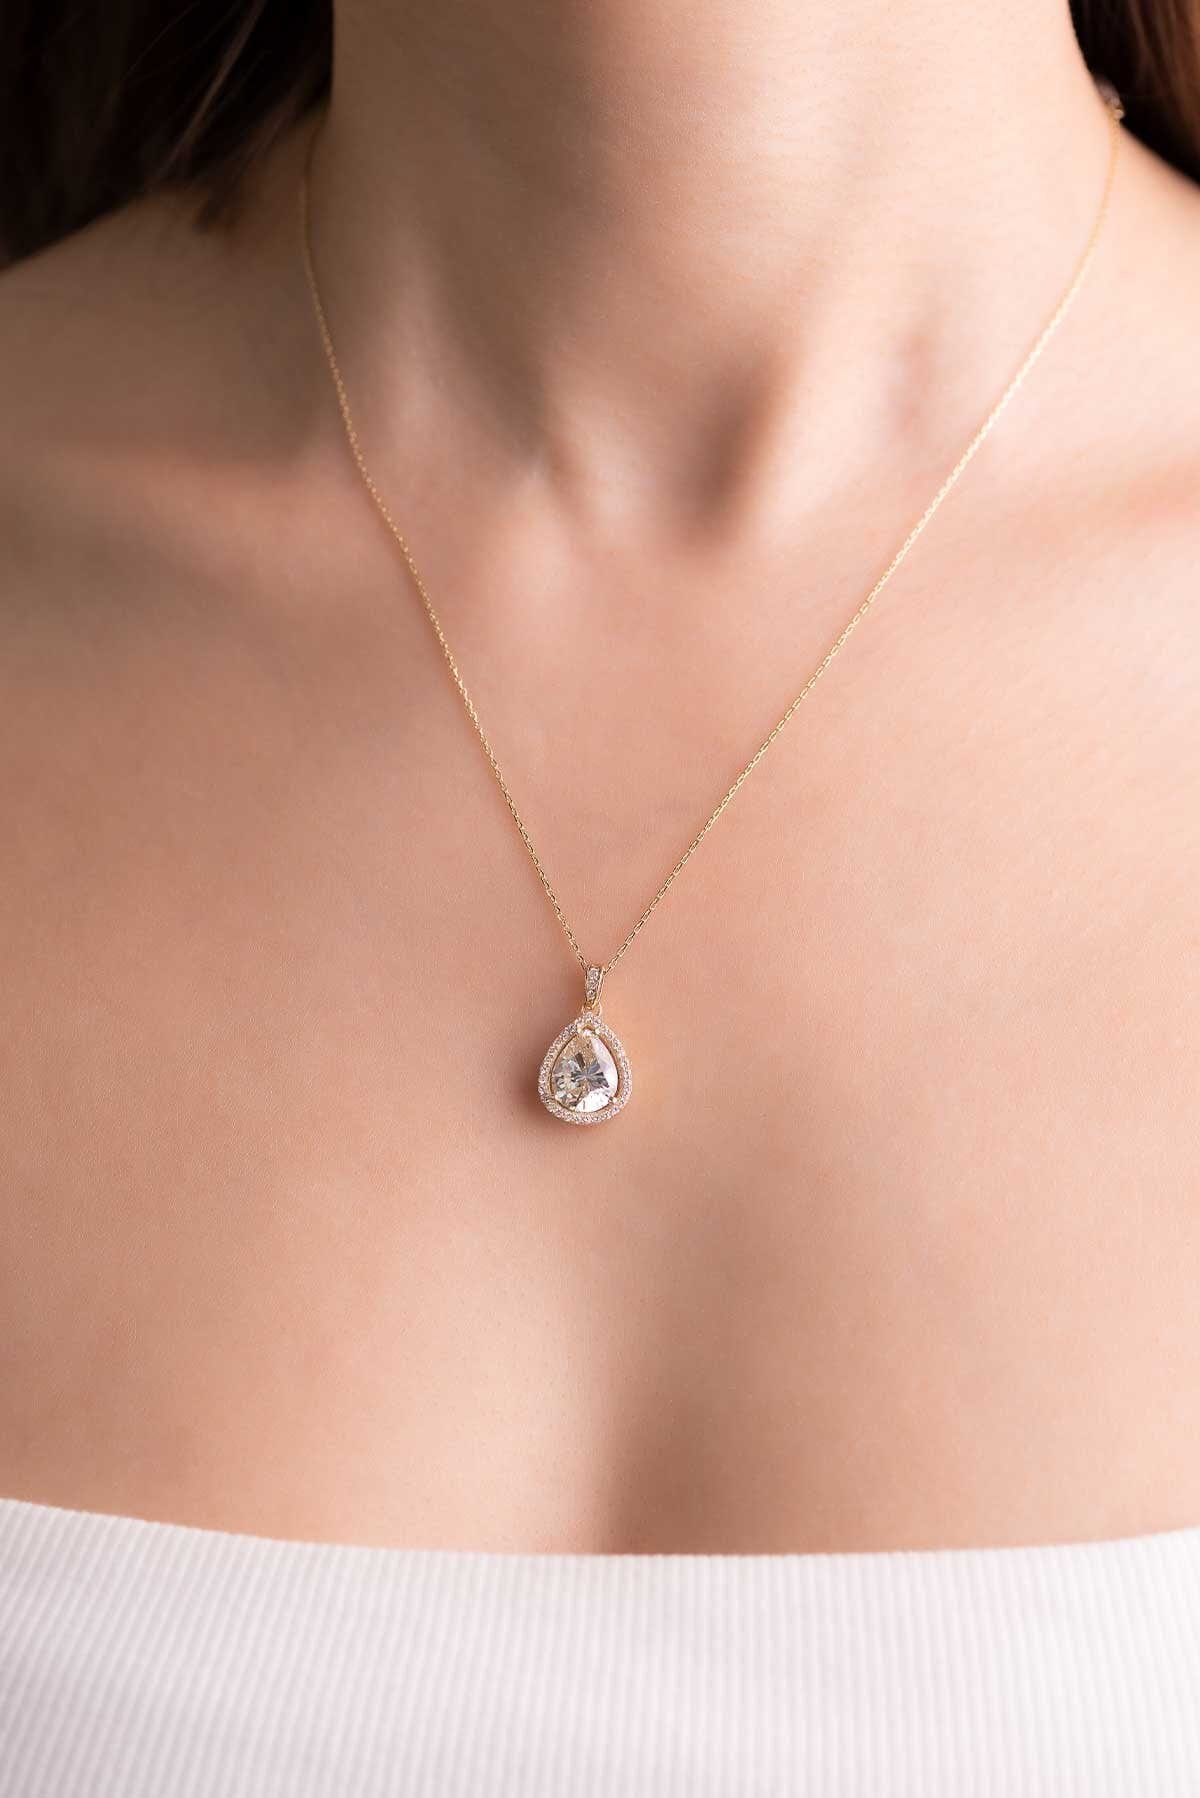 14 K Yellow Gold Certified Gold Premium Created Stone Drop Solitaire Necklace SoChic